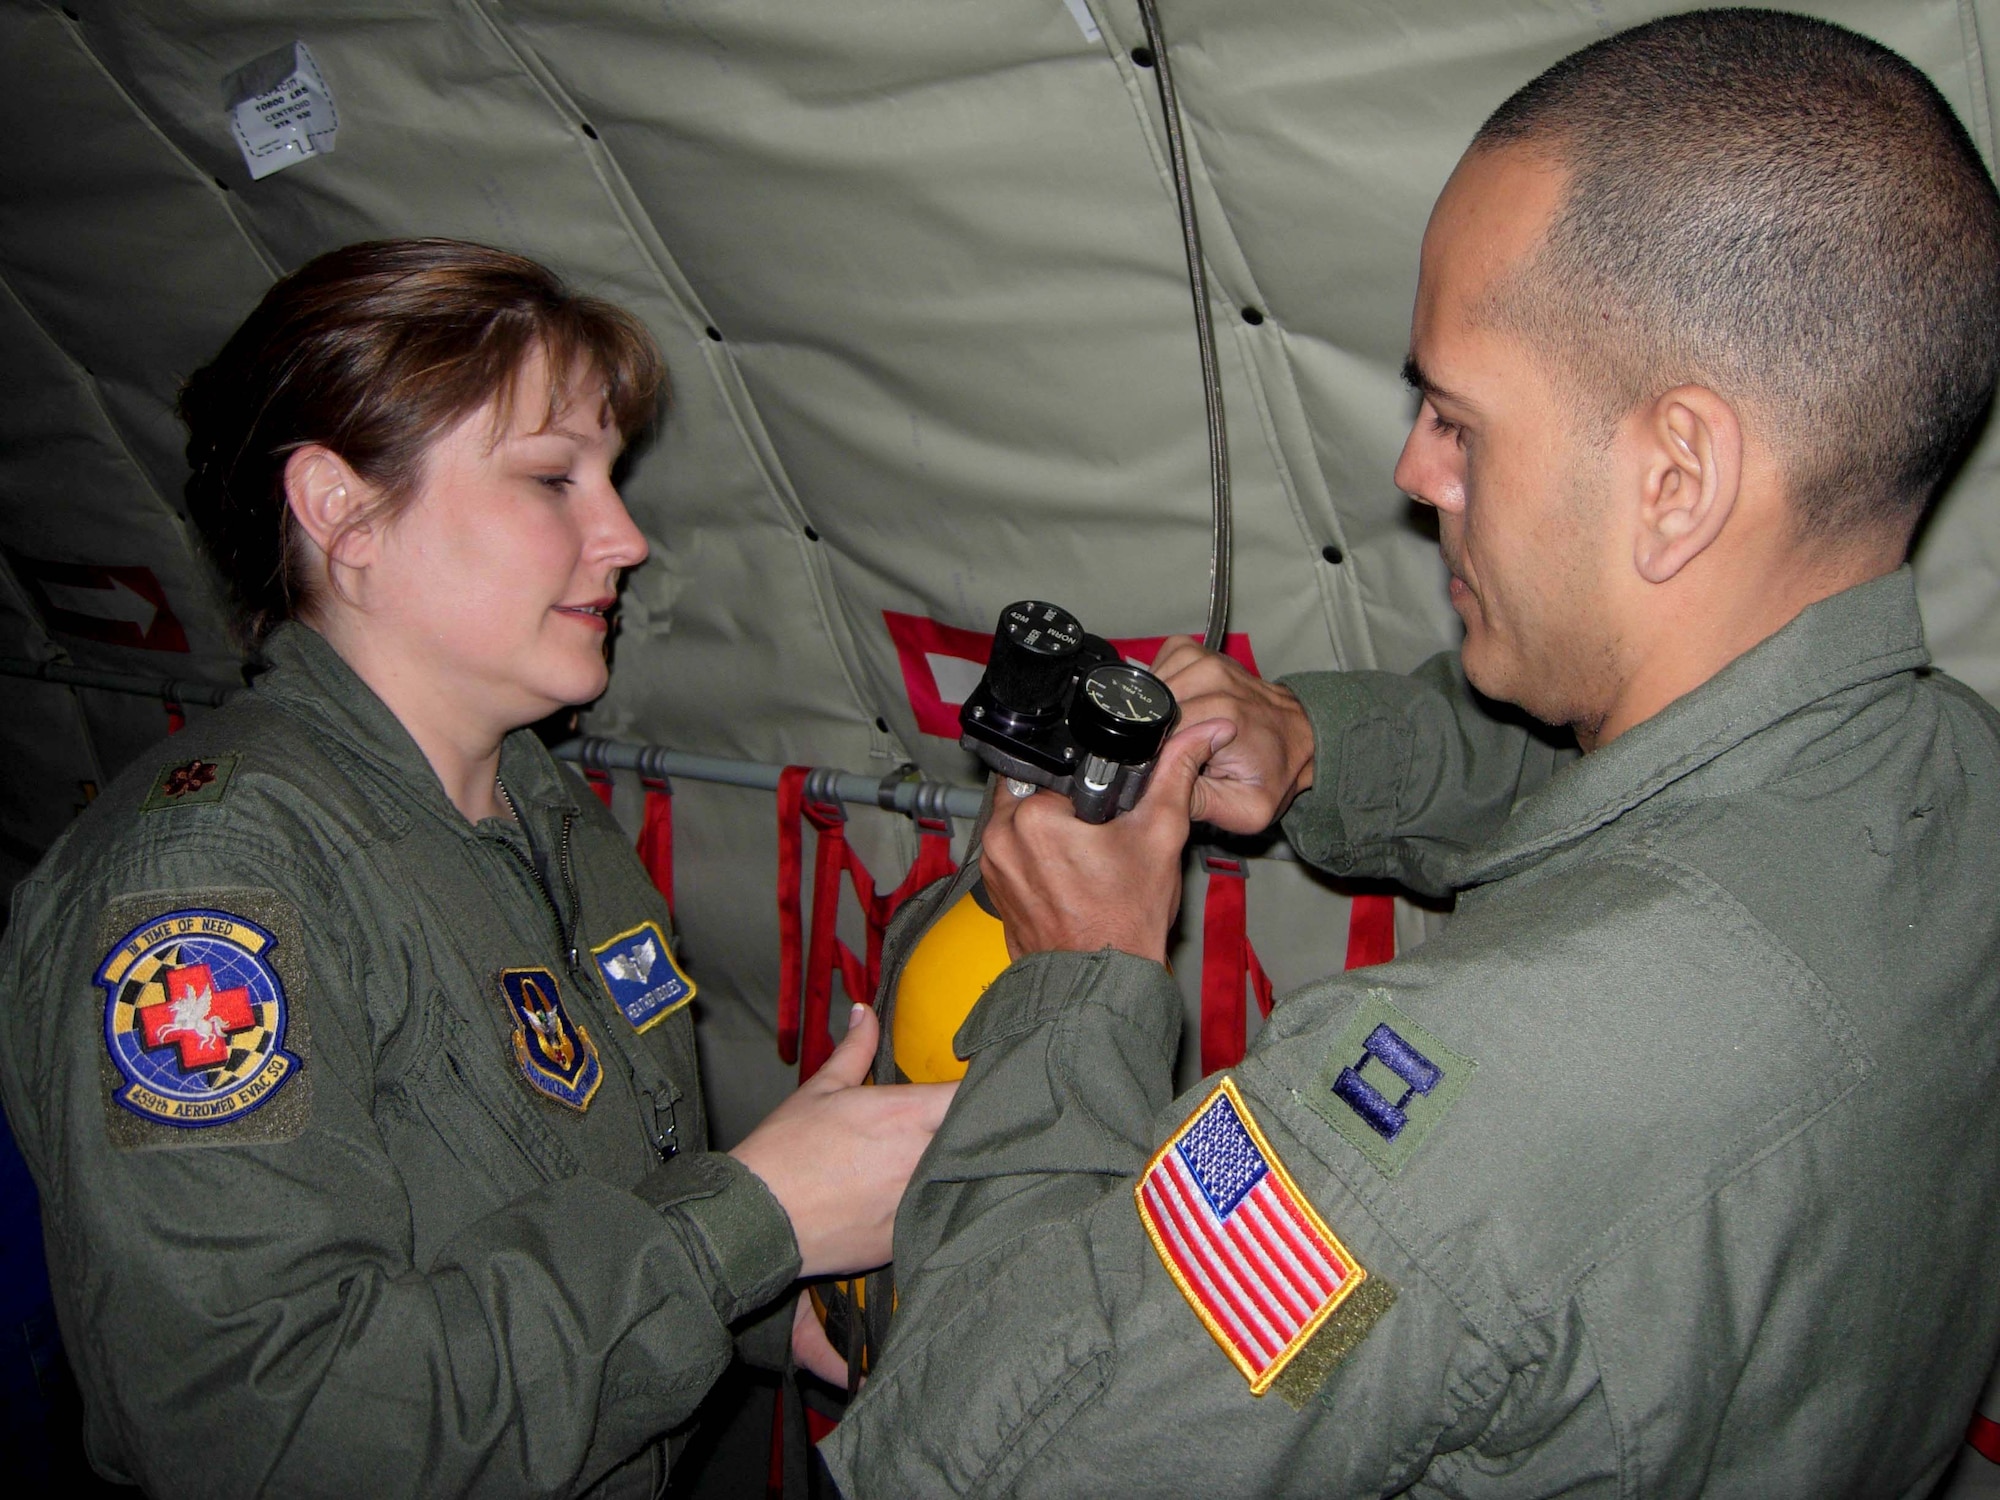 ST. CROIX, U.S.VIRGIN ISLANDS -- Maj. Heather Menzies and Capt. Eliud Lamboy, 459th Aeromedical Evacuation Squadron nurses, check the pressure of an oxygen tank during an in-flight exercise. Ten members of the 439th AES joined more than a dozen 459th AES members in a blended AE training mission to the island. Mission training expanded beyond the medical realm to include air refueling and an overseas sortie. (U.S. Air Force photo/Staff Sgt. Amaani Lyle)